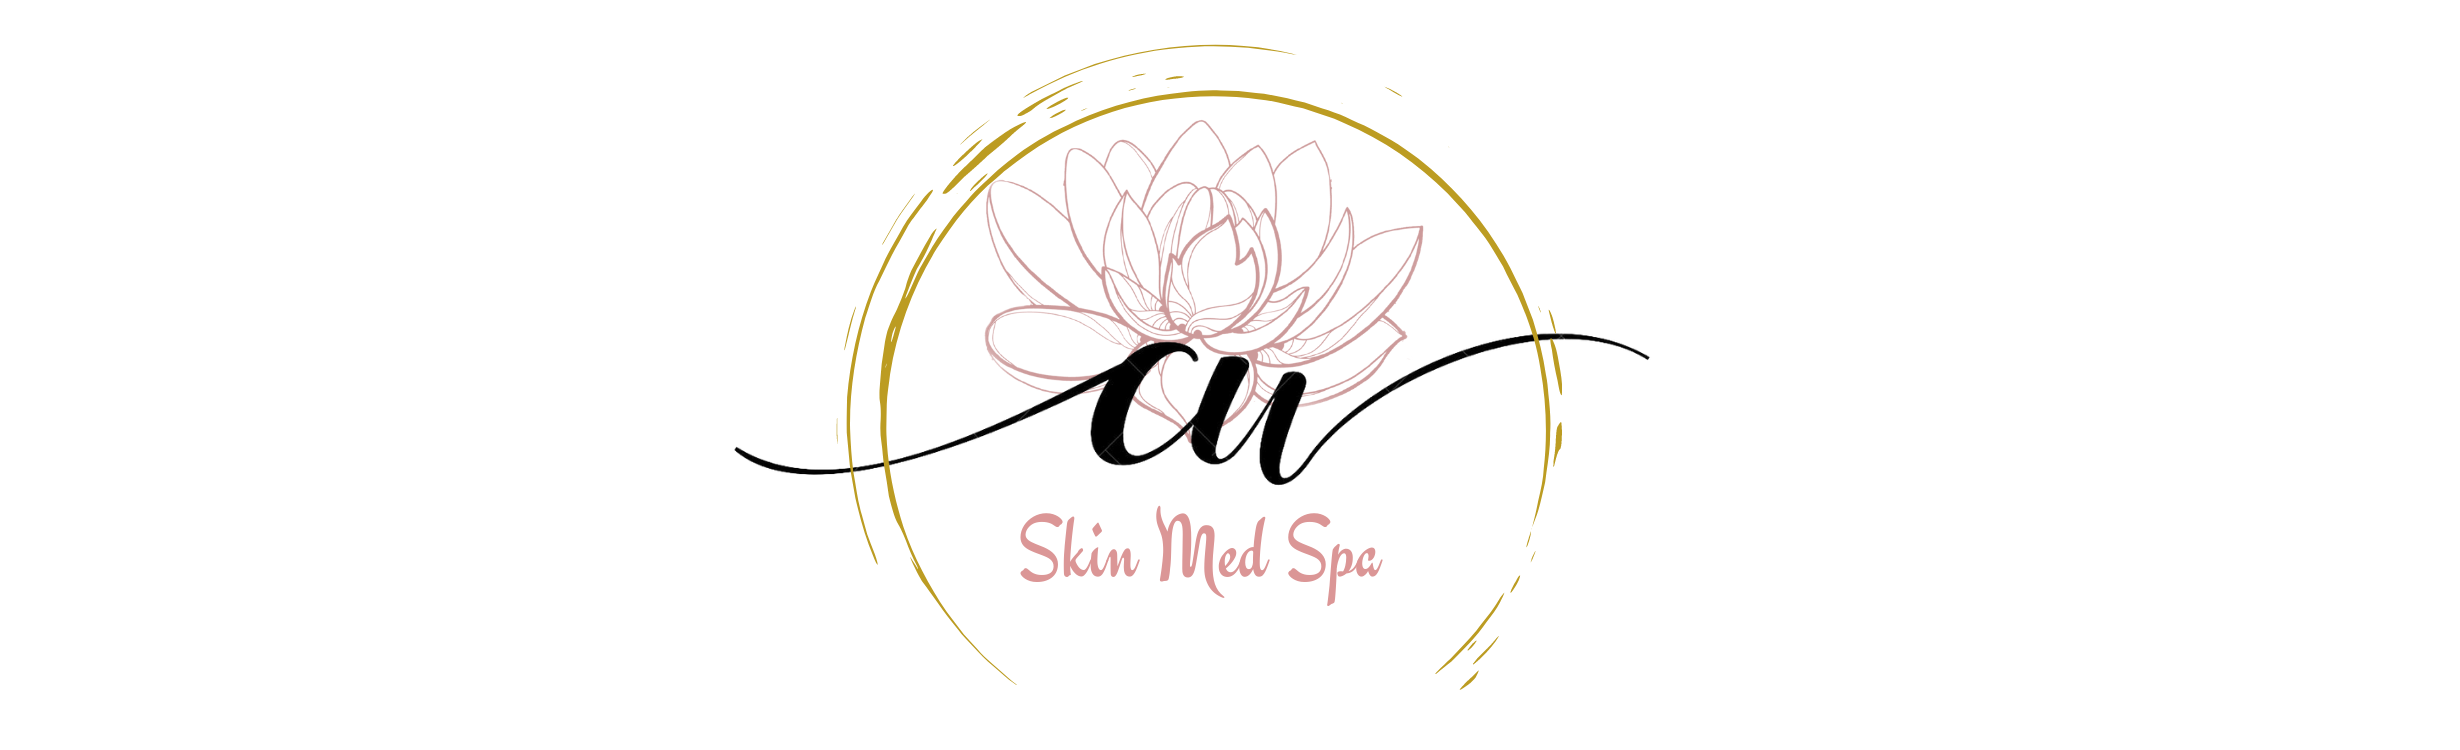 Services | CW Skin Med SPA